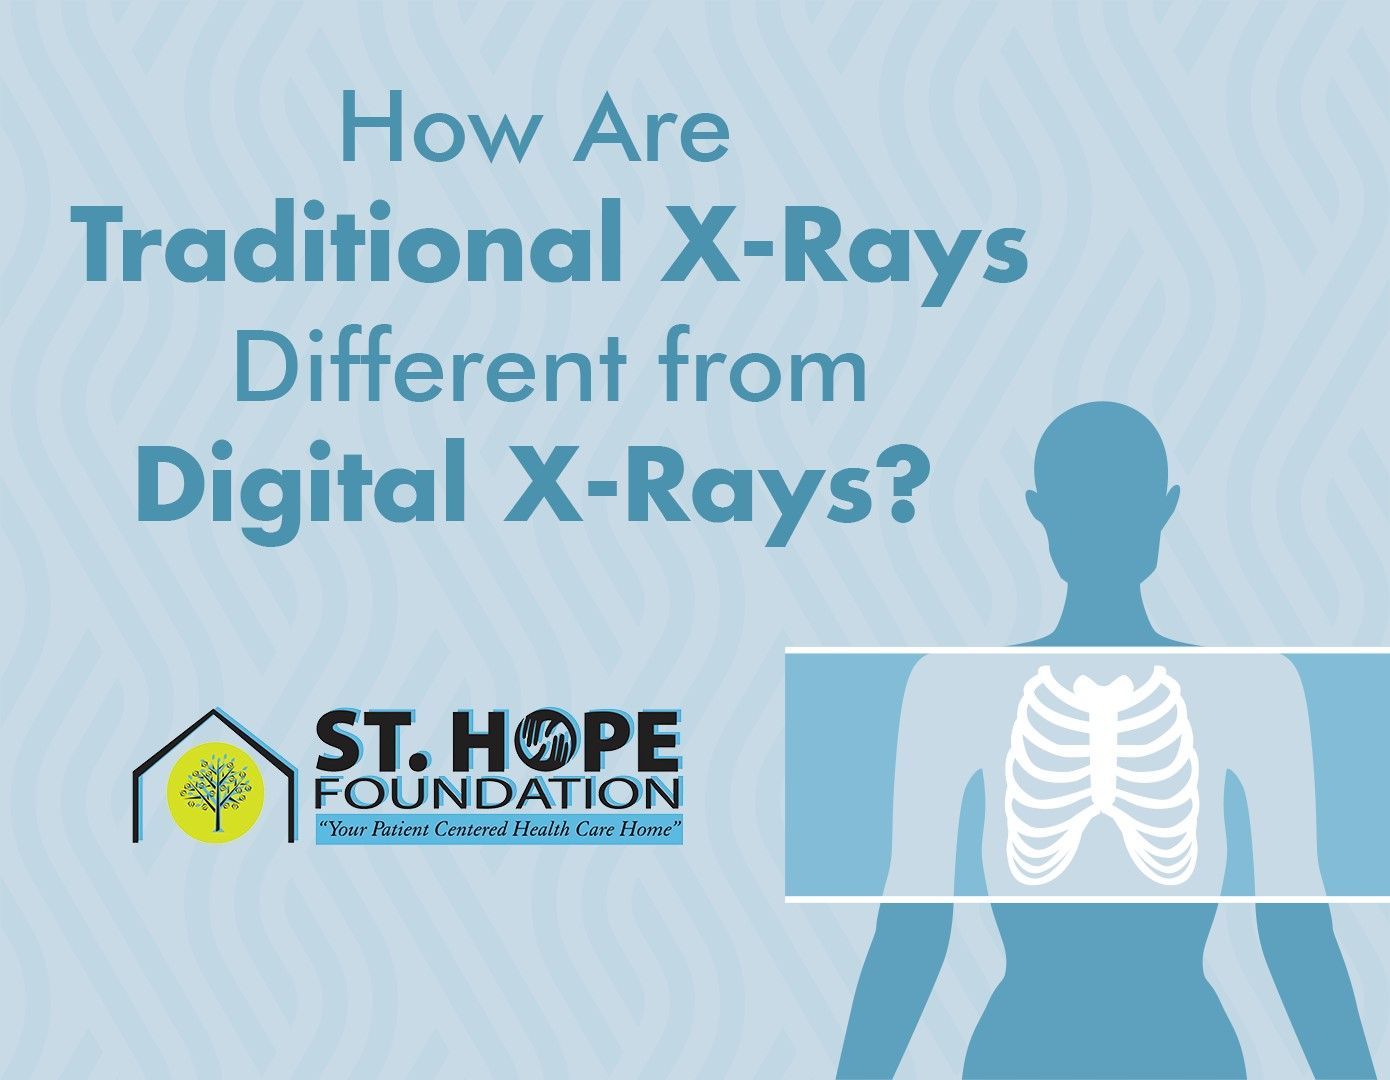 how are traditional x-rays different from digital x-rays?